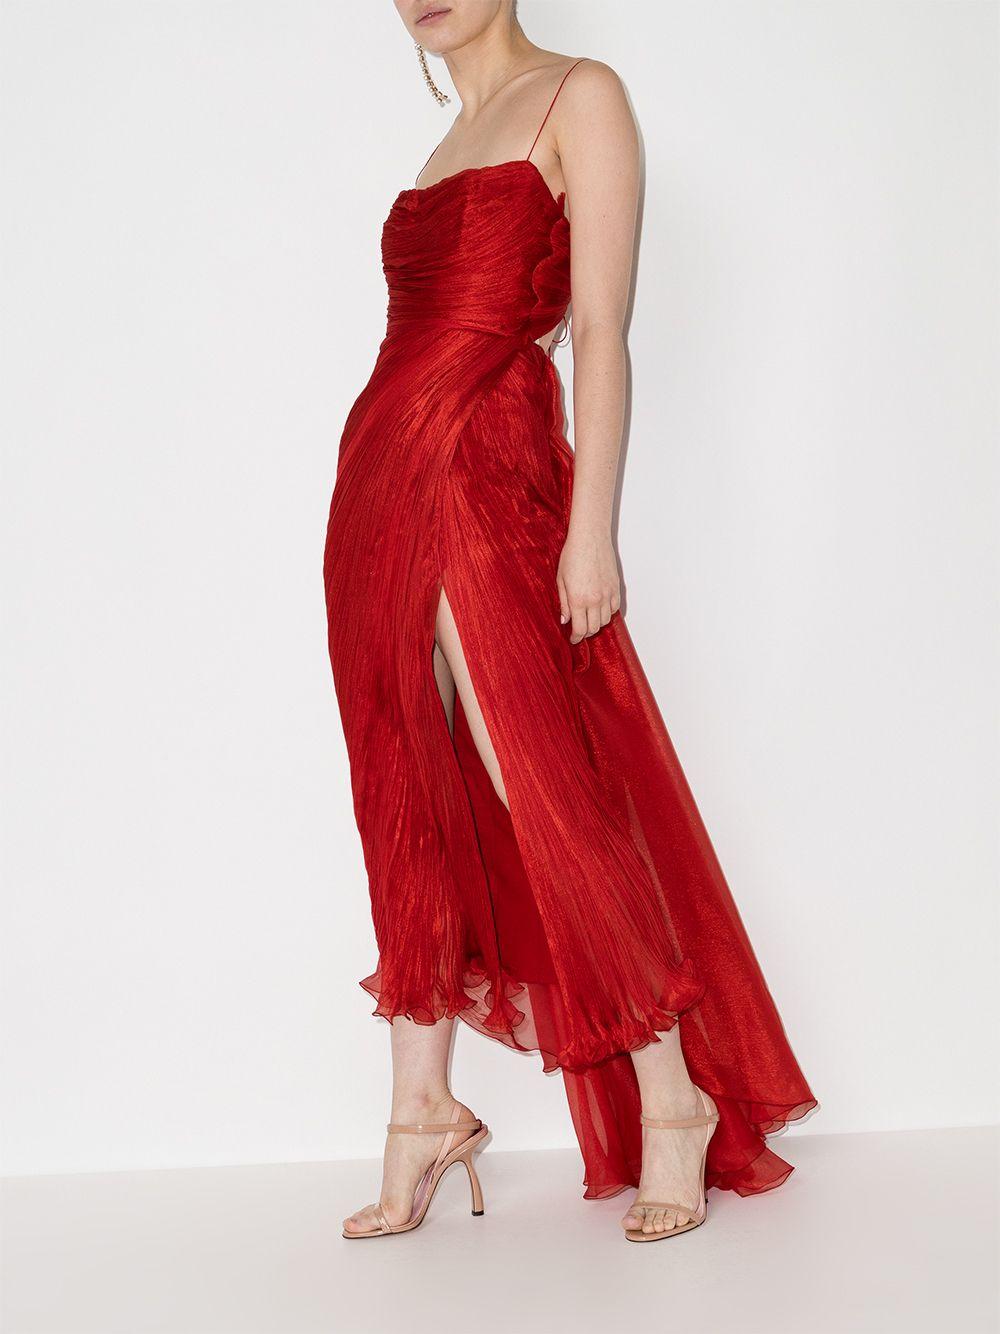 Maria Lucia Hohan Siona Strappy Draped Dress in Red | Lyst